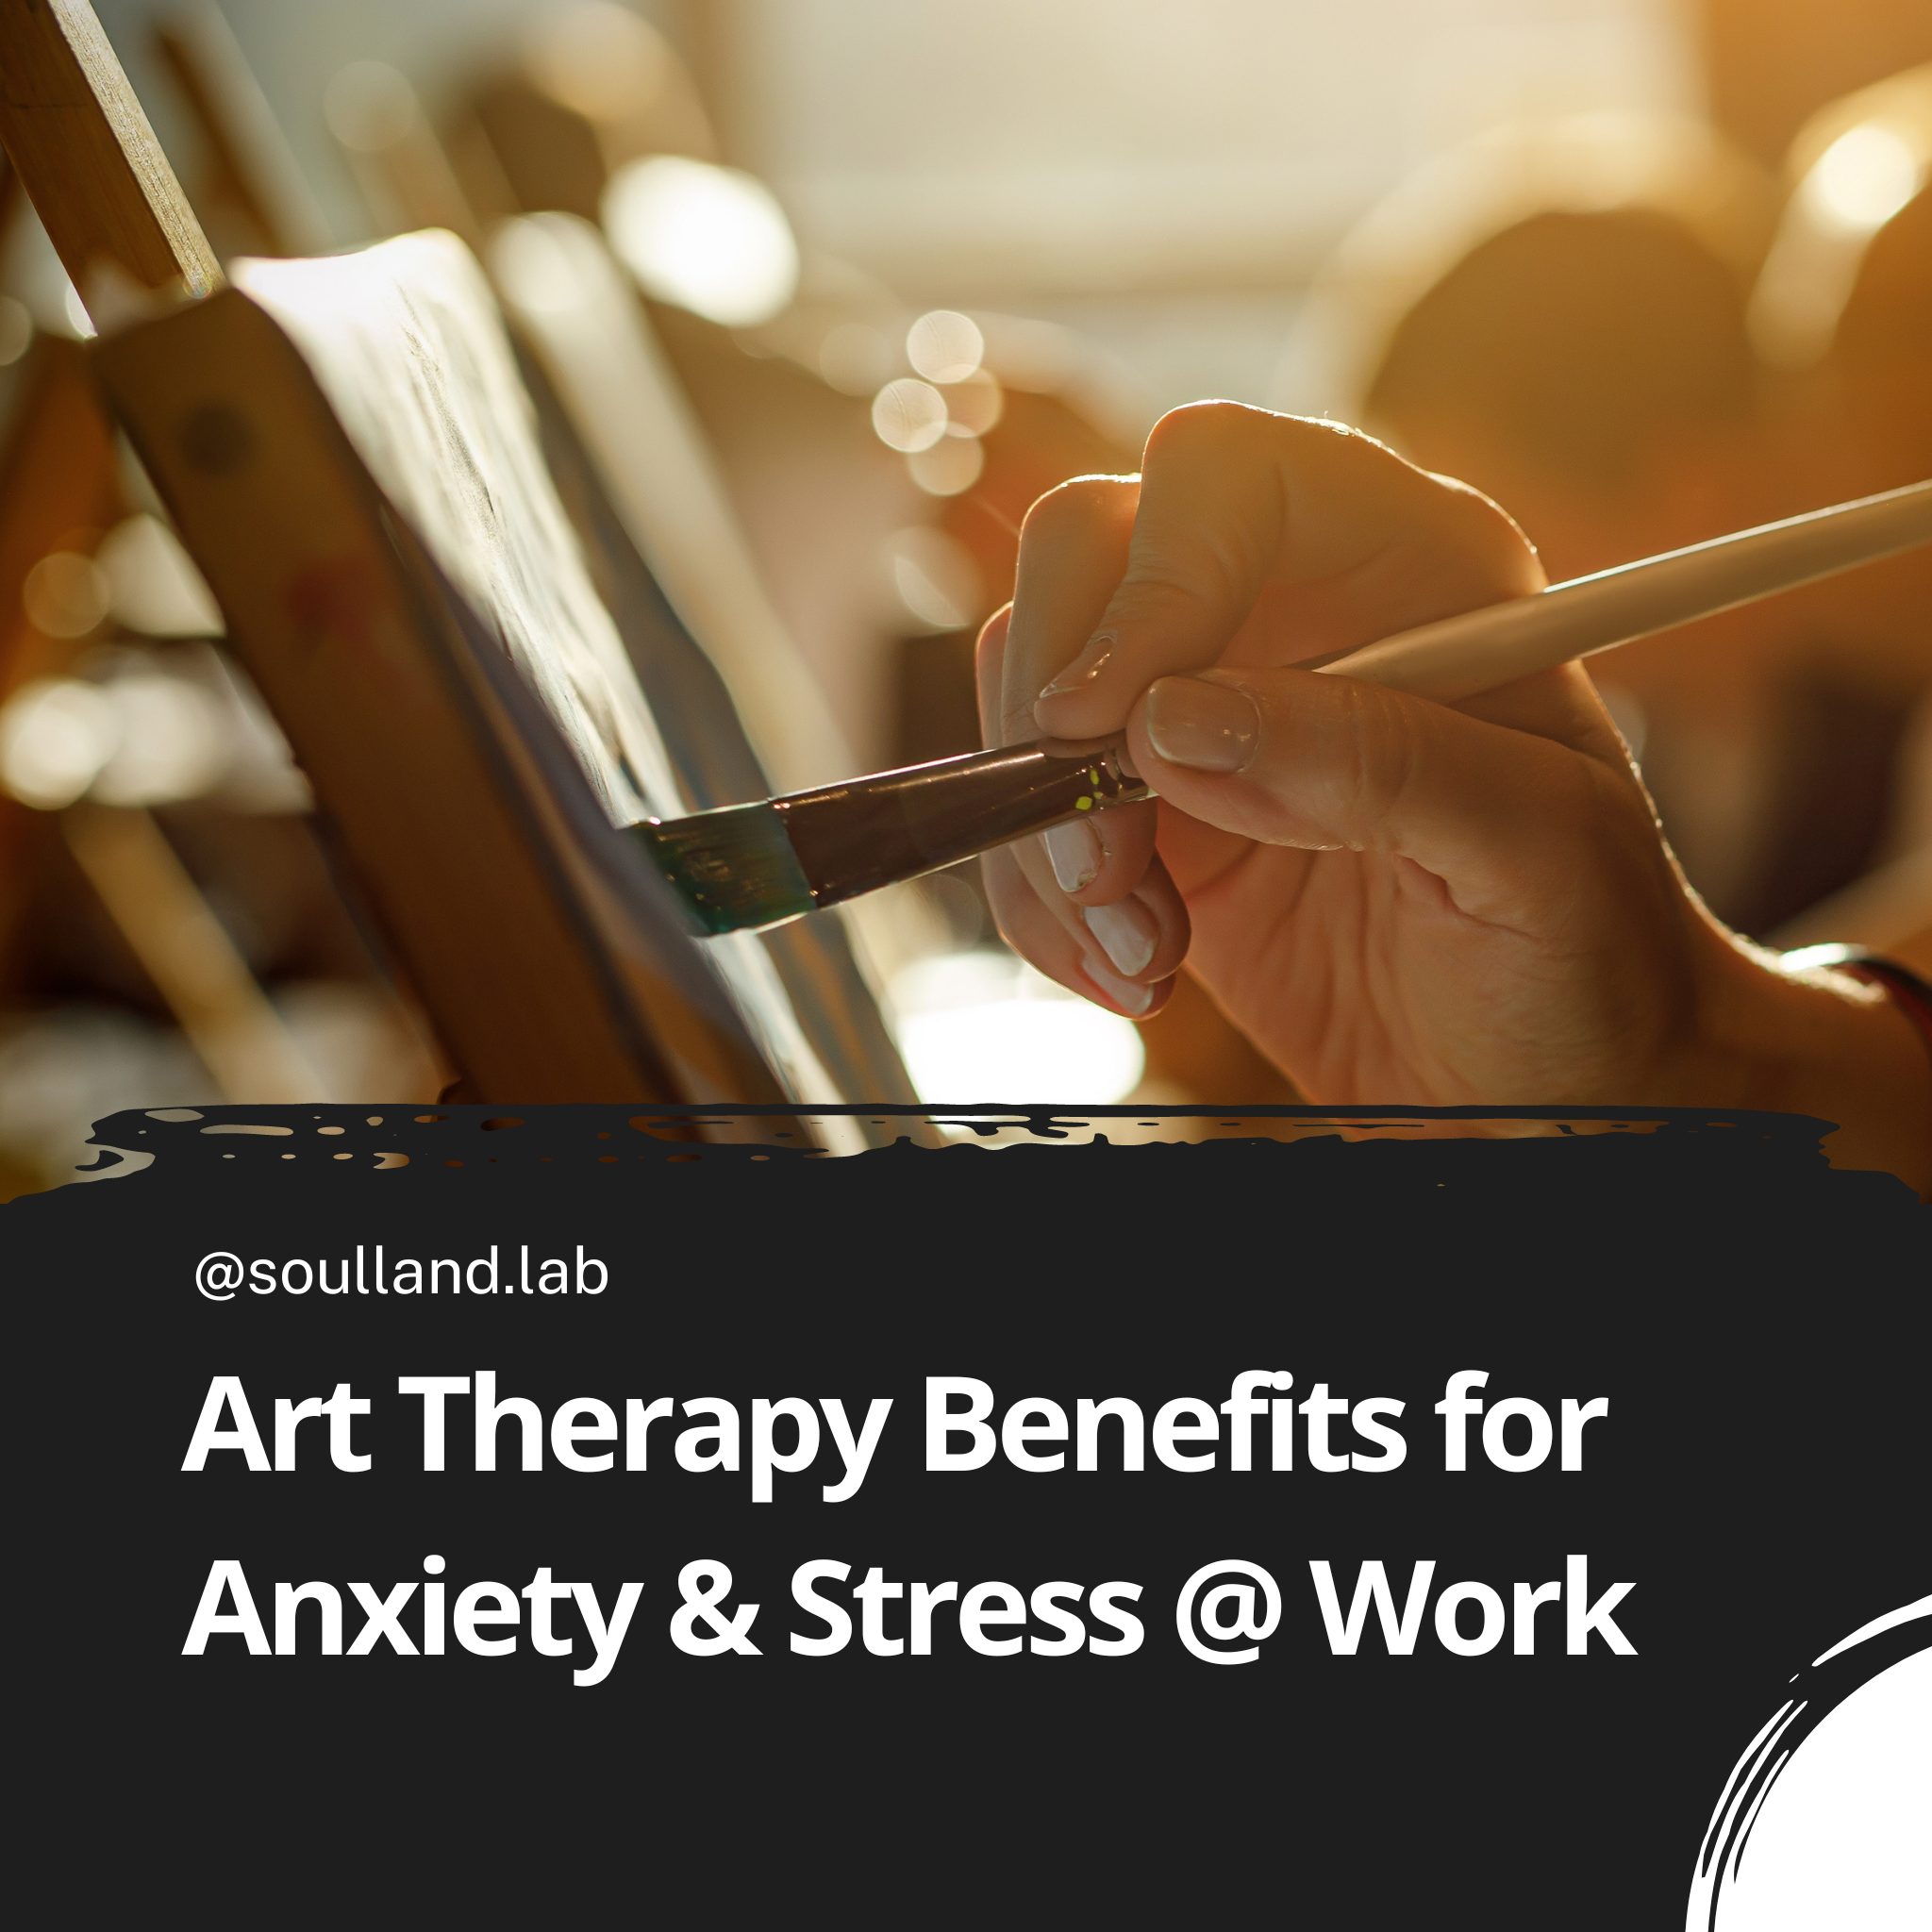 Art Therapy Benefits for Anxiety & Stress at Work